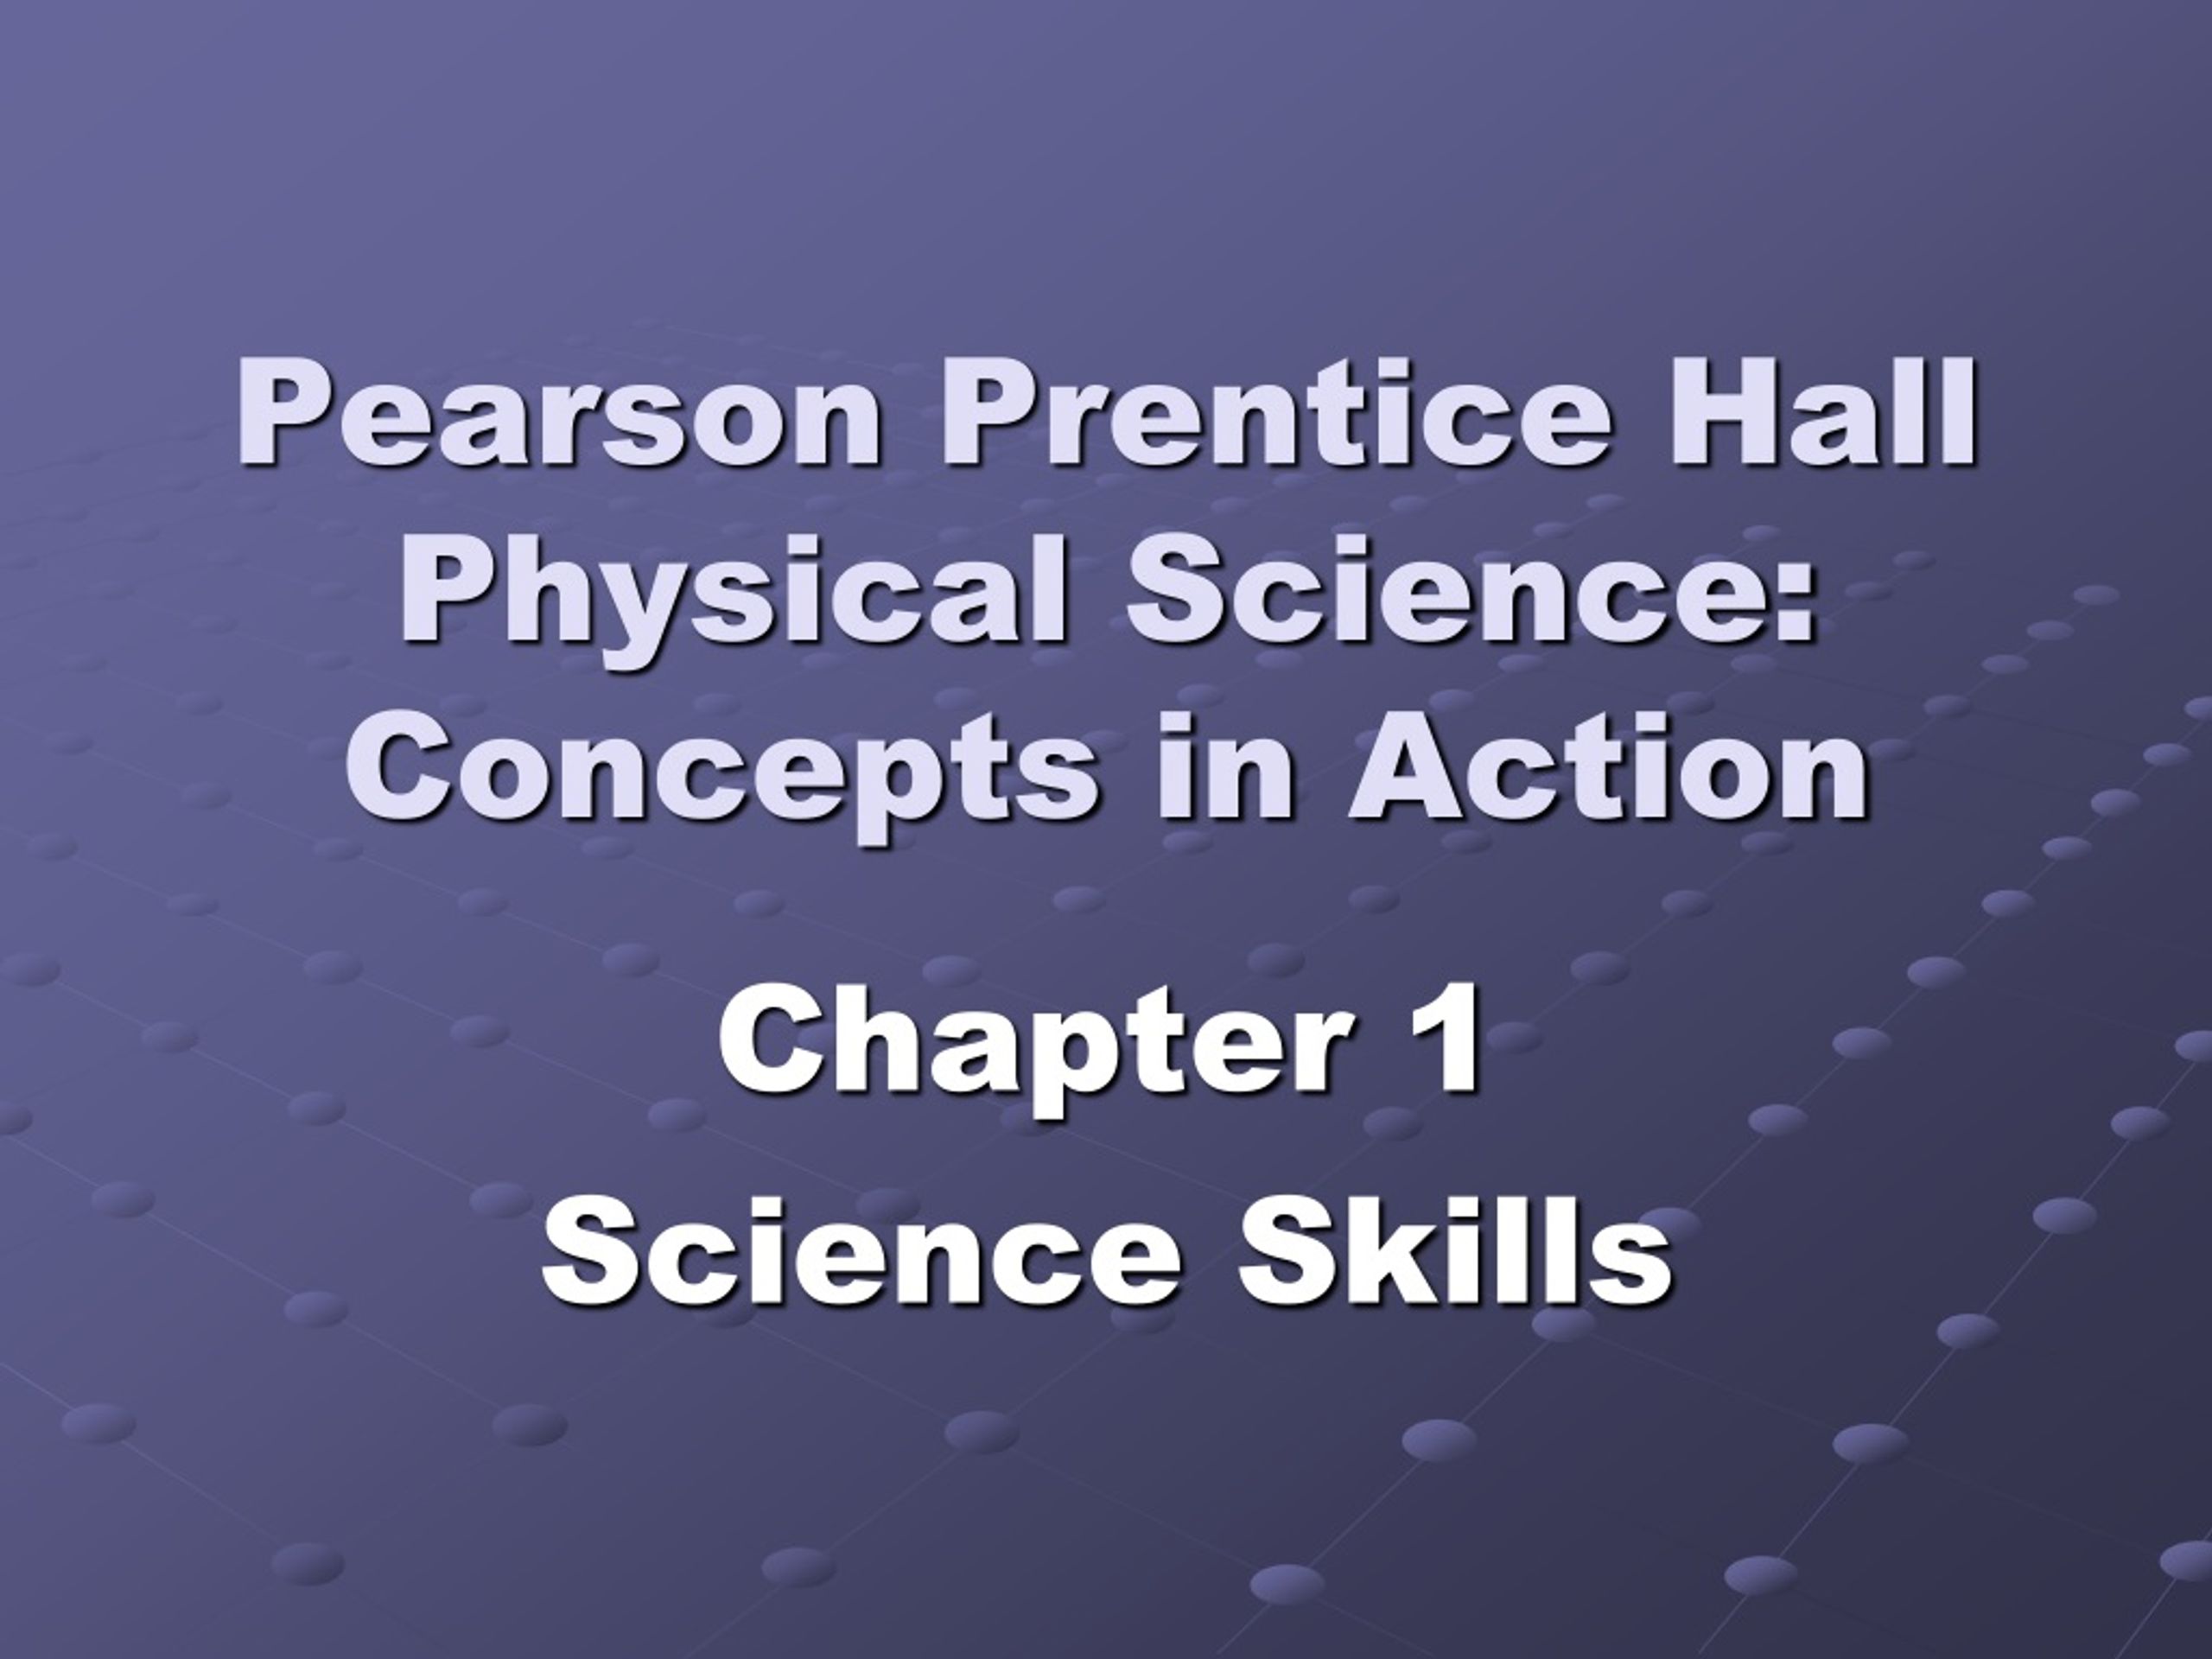 PPT Pearson Prentice Hall Physical Science Concepts in Action PowerPoint Presentation ID246725